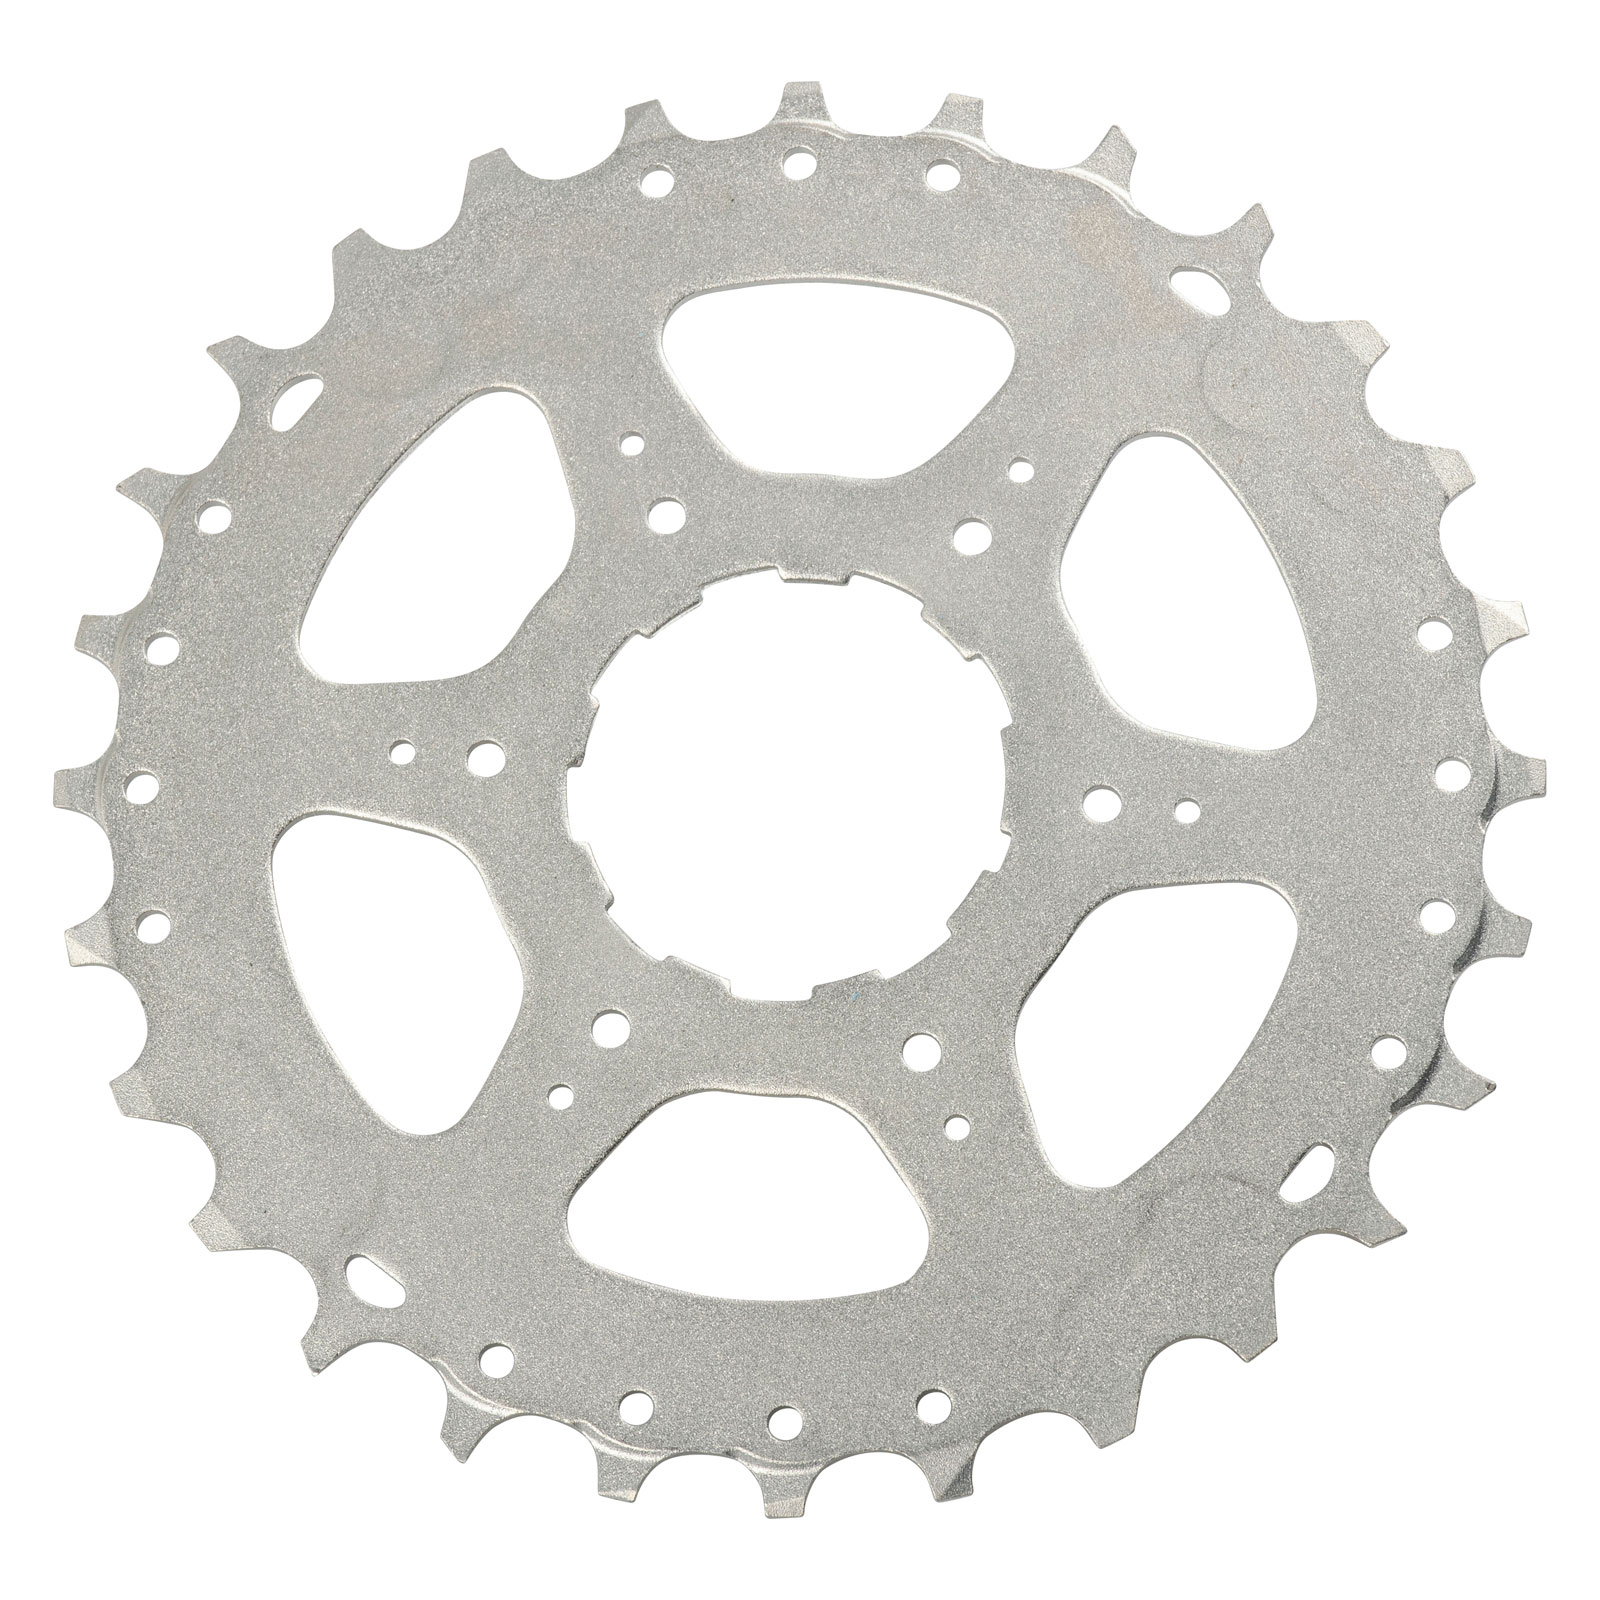 Picture of Shimano Sprocket for Deore XT / SLX 11-speed Cassette - 28 teeth for 11-42 (Y1VN28000) - CS-M7000